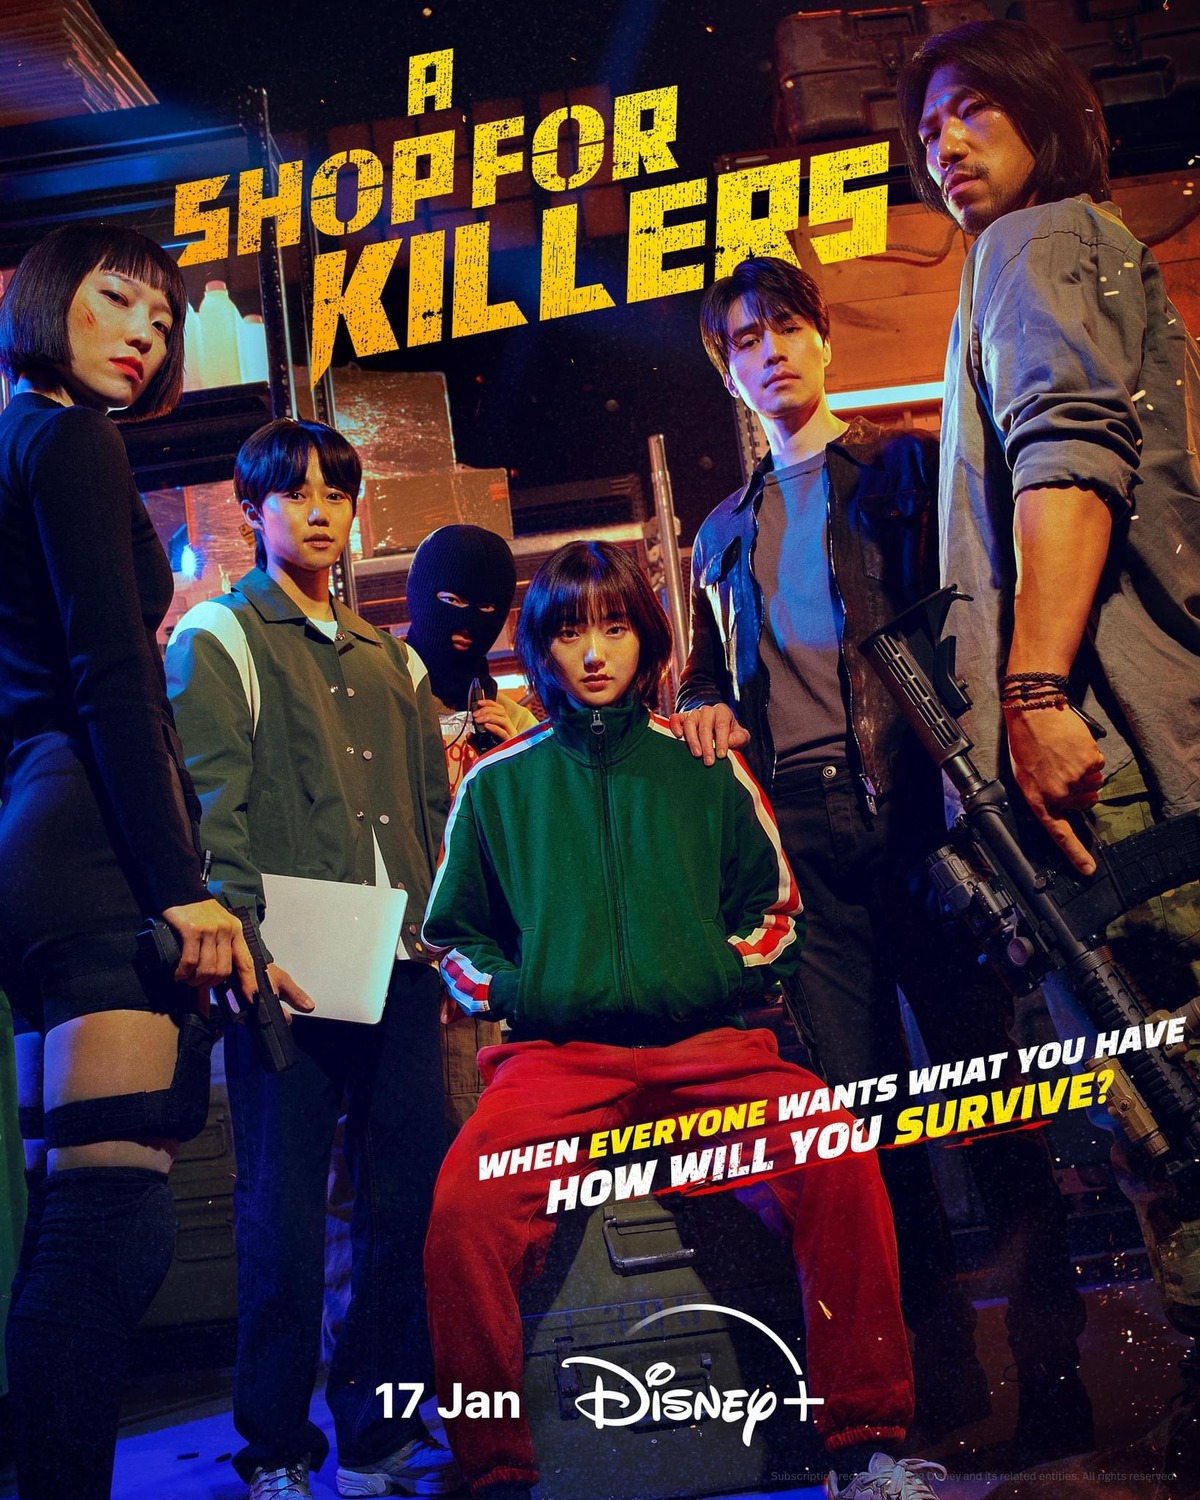 Extra Large TV Poster Image for A Shop for Killers (#2 of 4)